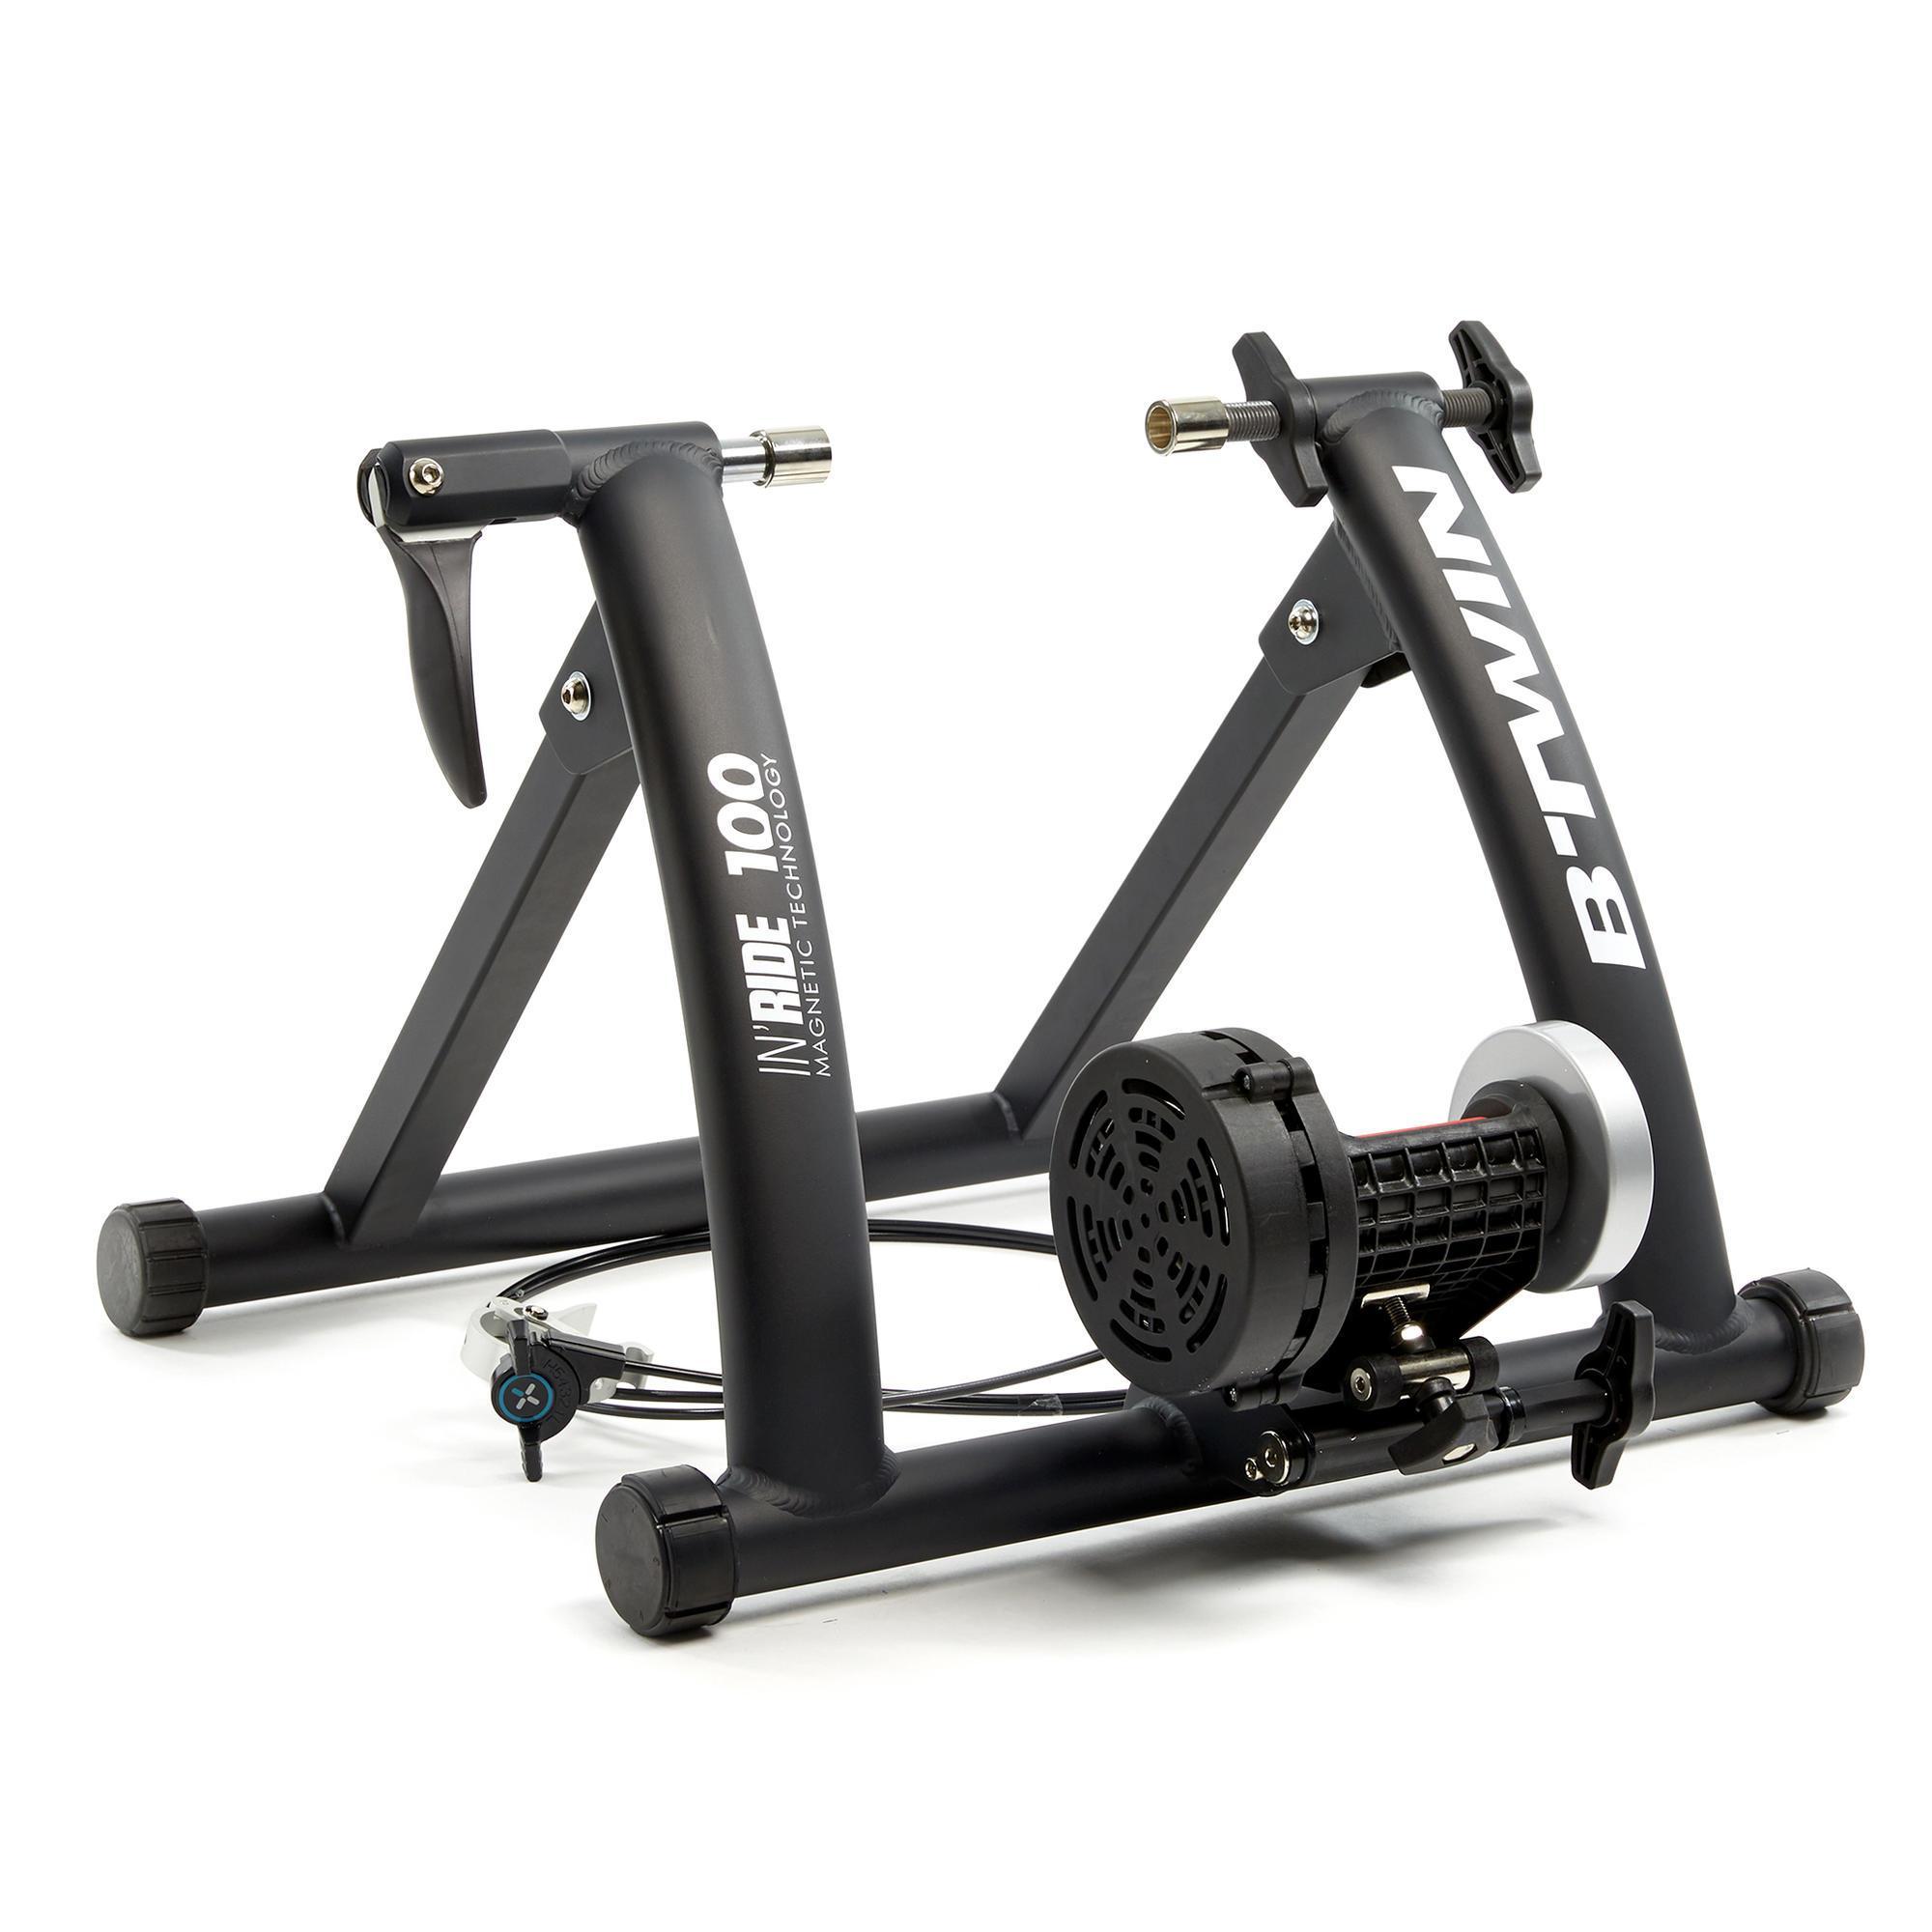 In'Ride 300 Home Trainer 550 Watts 